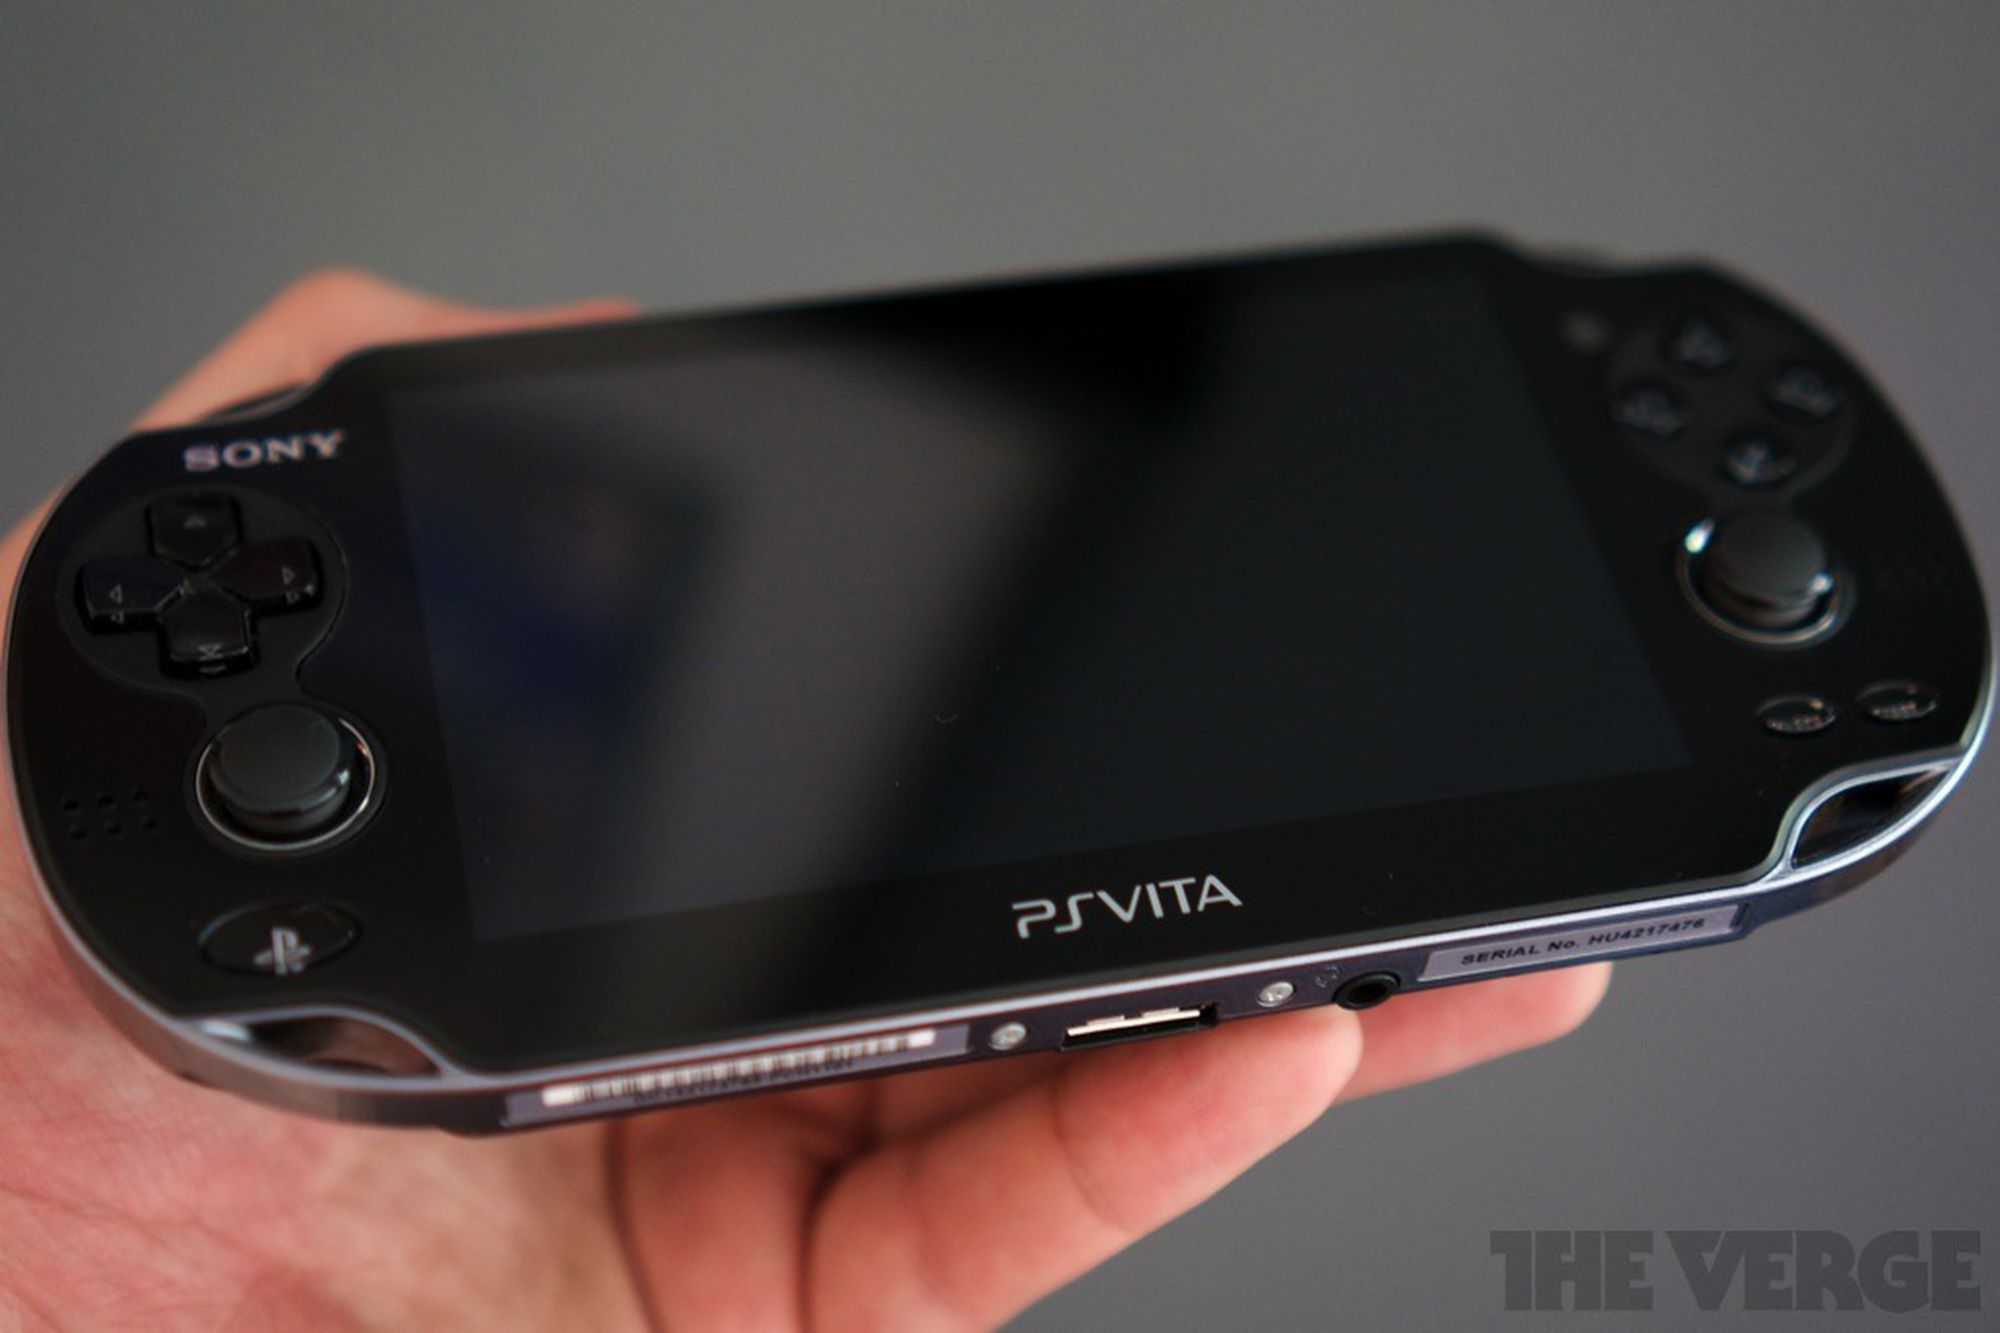 Sony cuts PS Vita price to $199.99, reduces cost of memory cards 